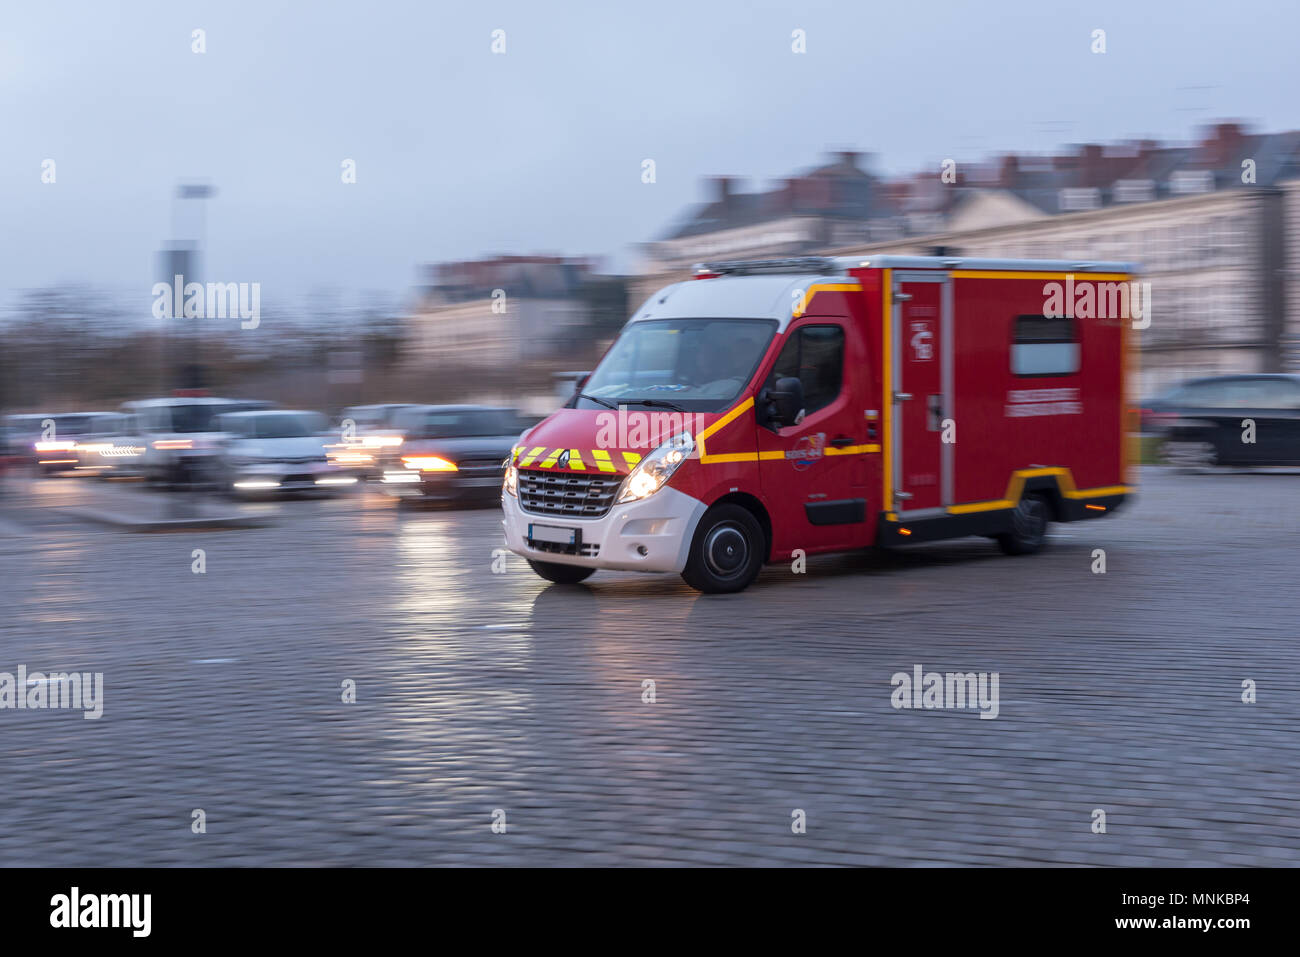 Paris, France - Novmeber 18, 2017: Government fire department red truck in the street of Paris, France Stock Photo